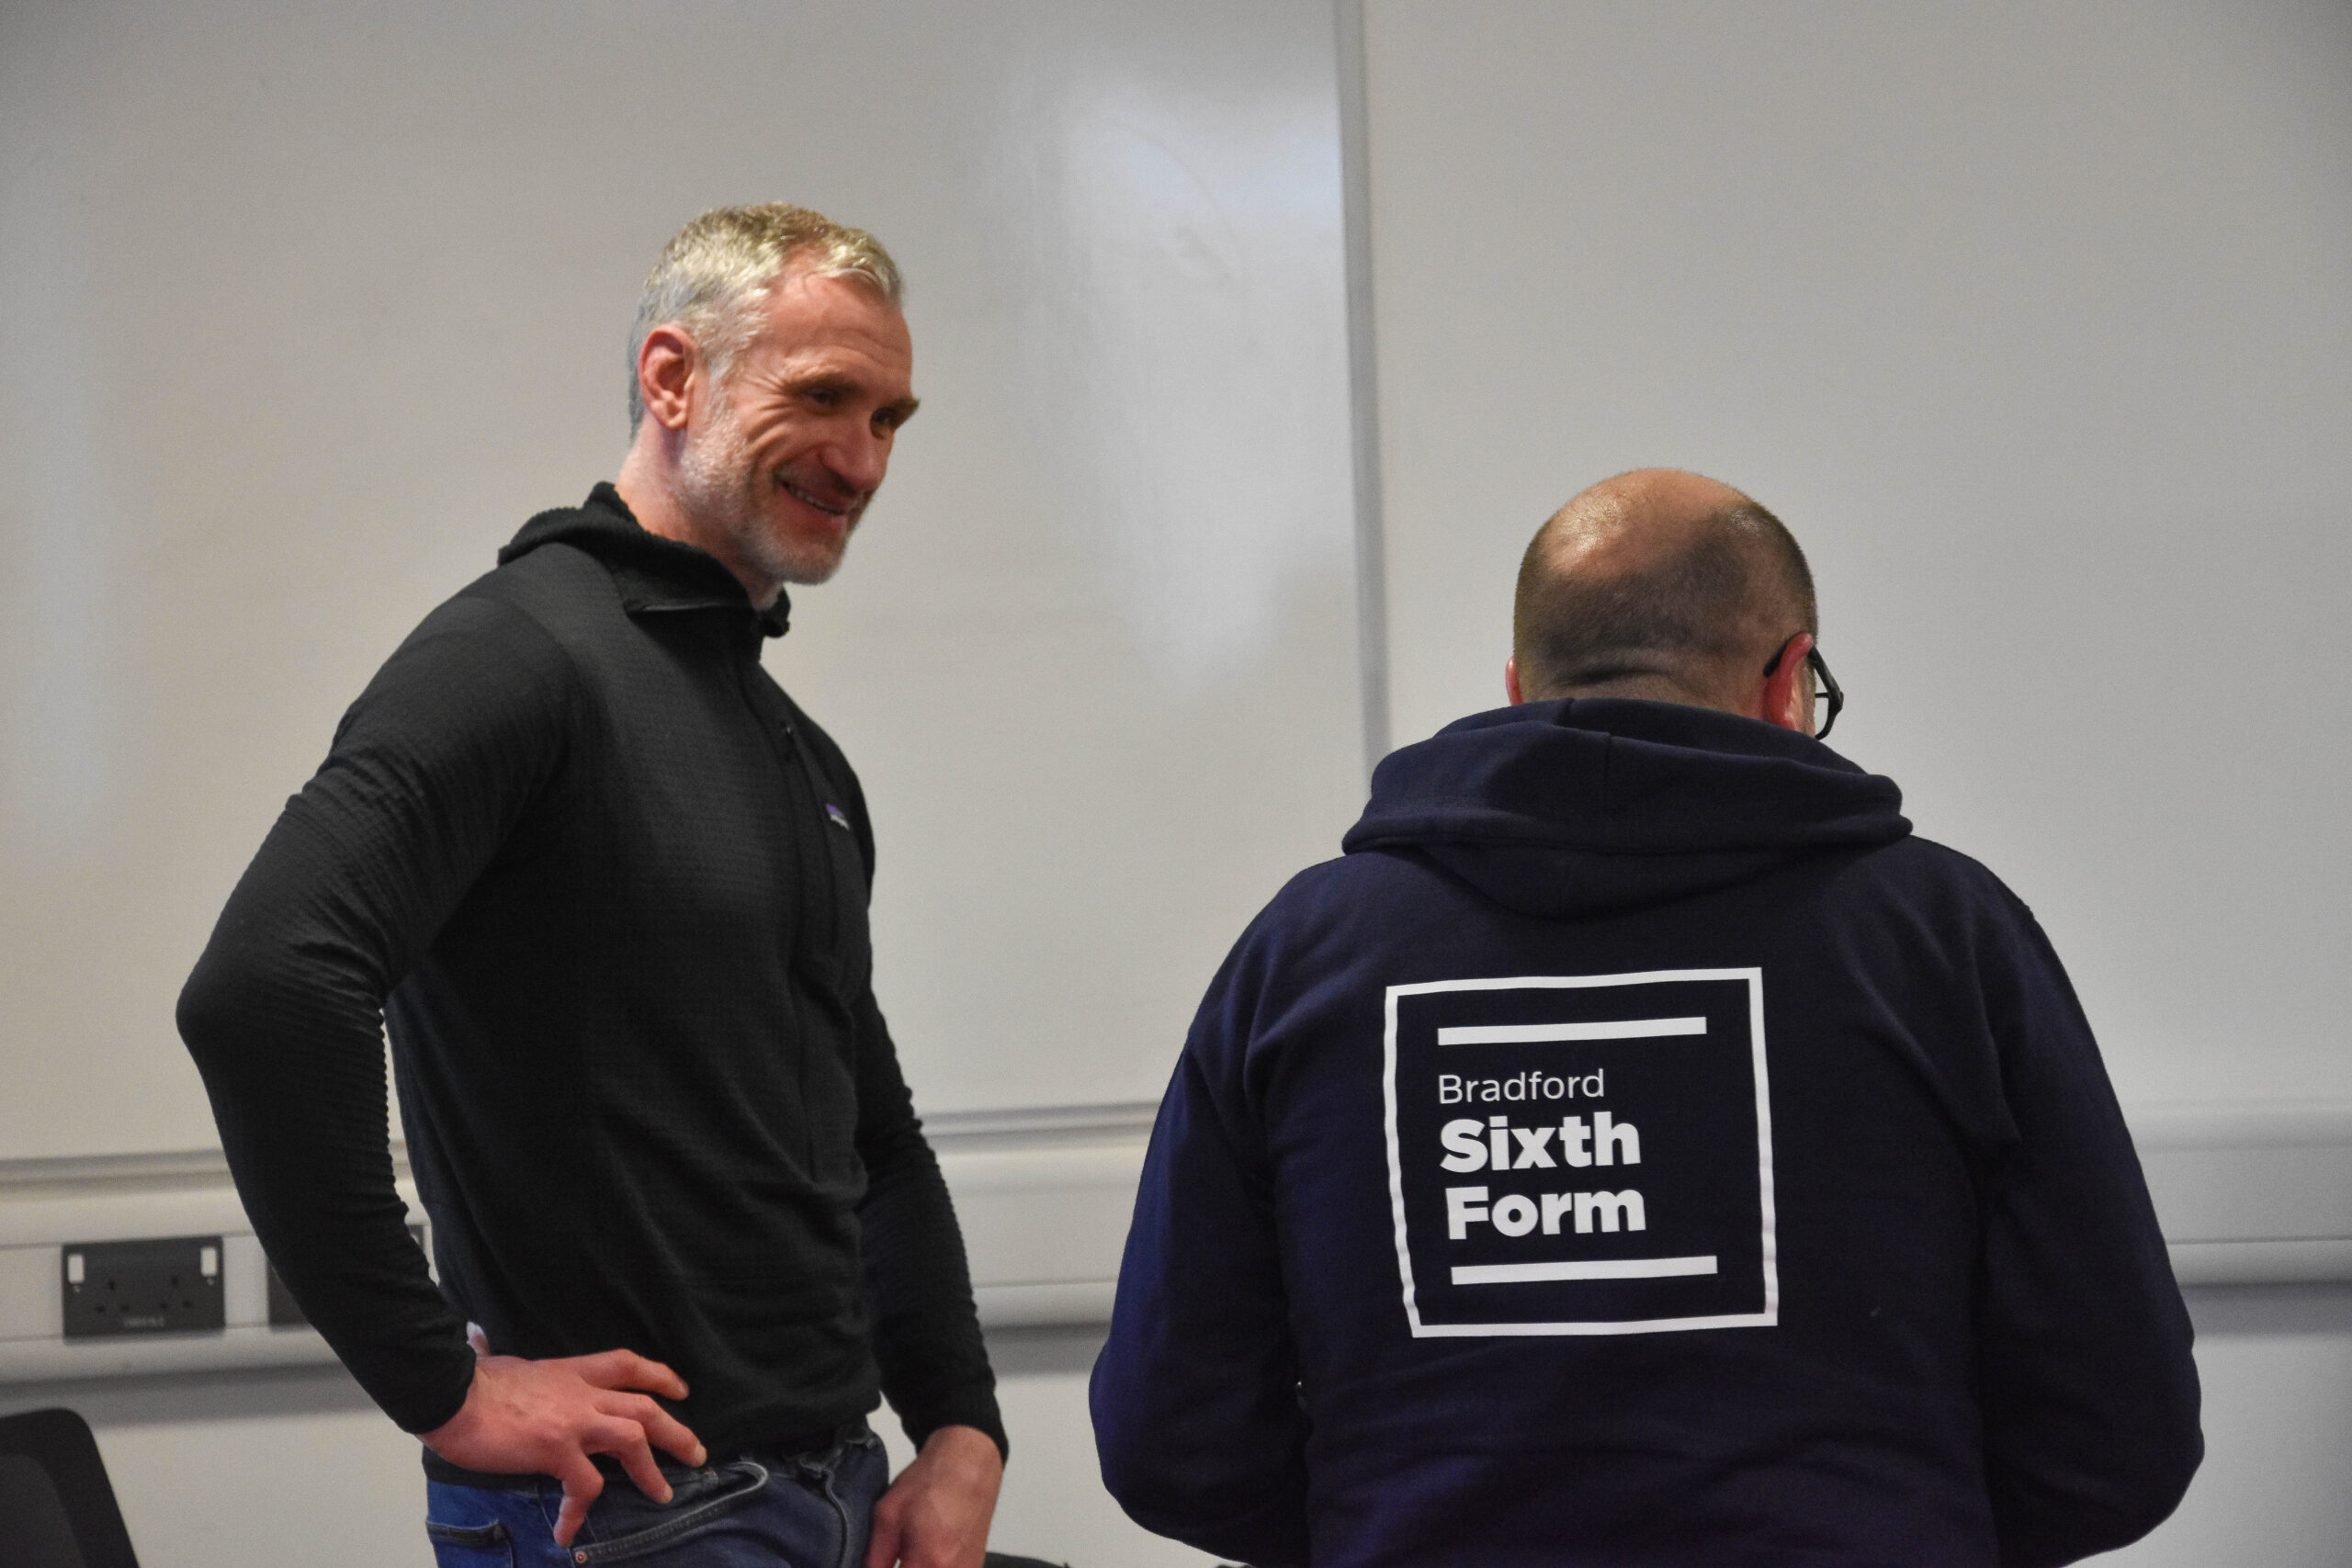 Bradford Sixth Form students treated to special visit from Rugby League legend